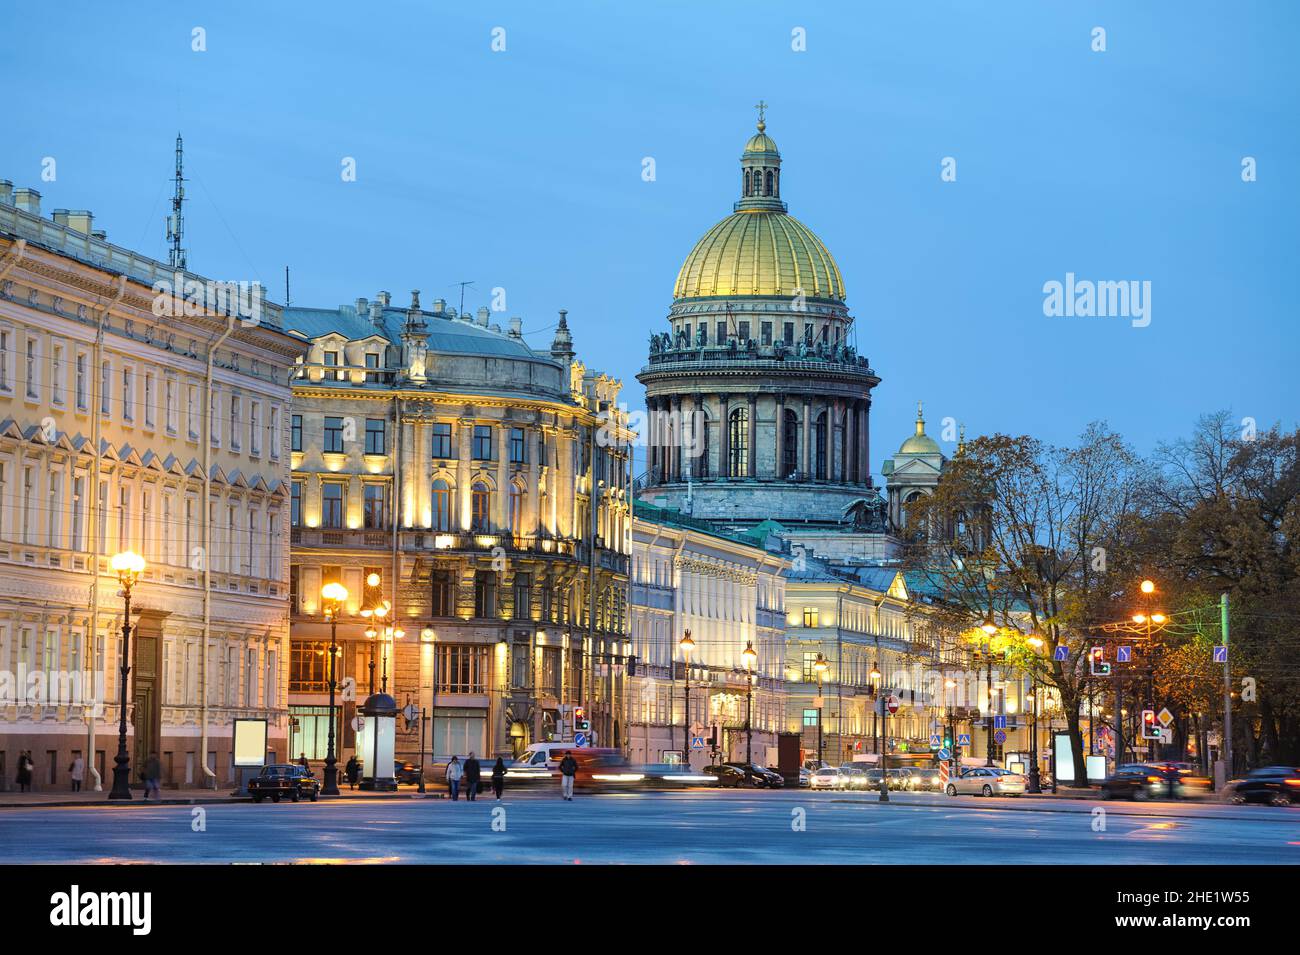 Golden domes of the Saint Isaac cathedral, one of the biggest cathedrals in Europe, in St Petersburg city, Russia Stock Photo